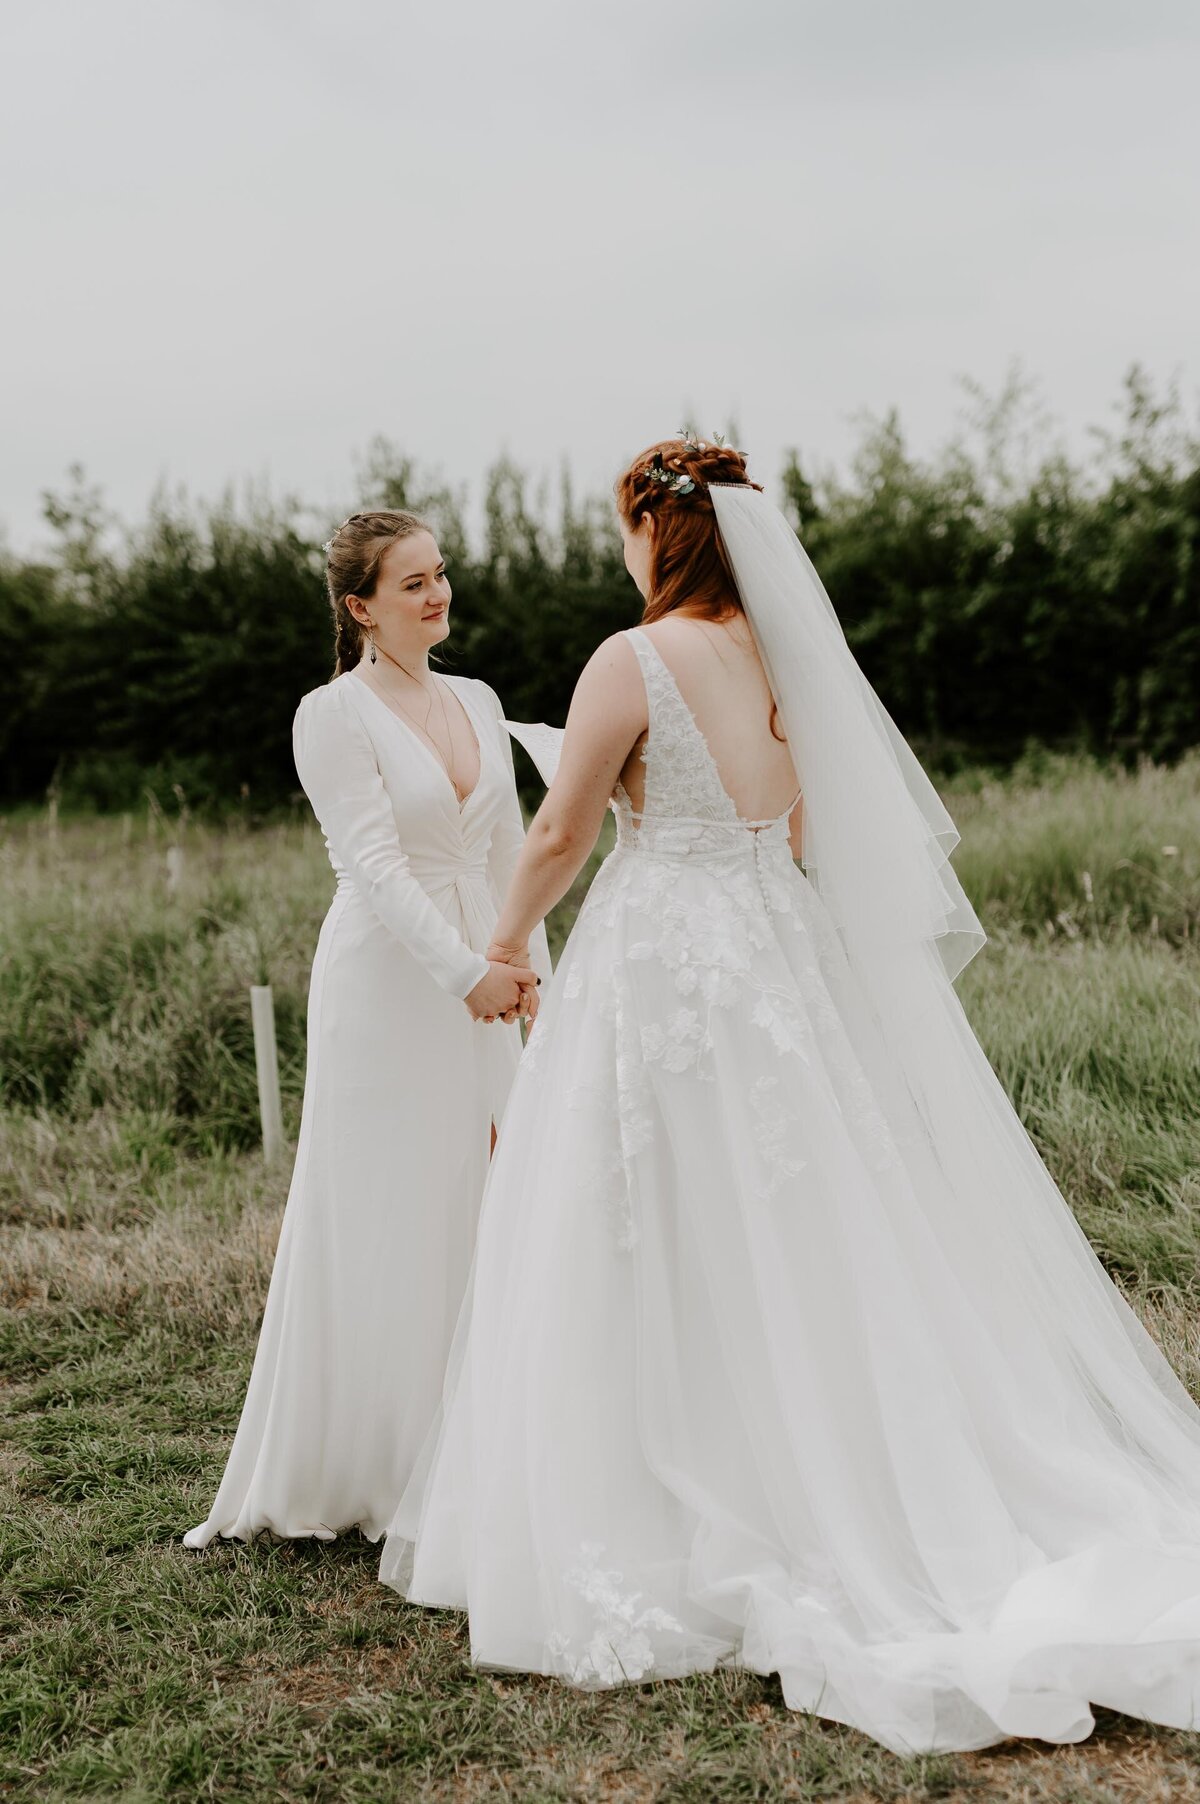 Elle and Phoebe - 4.9.21 - Laura Williams Photography - 180